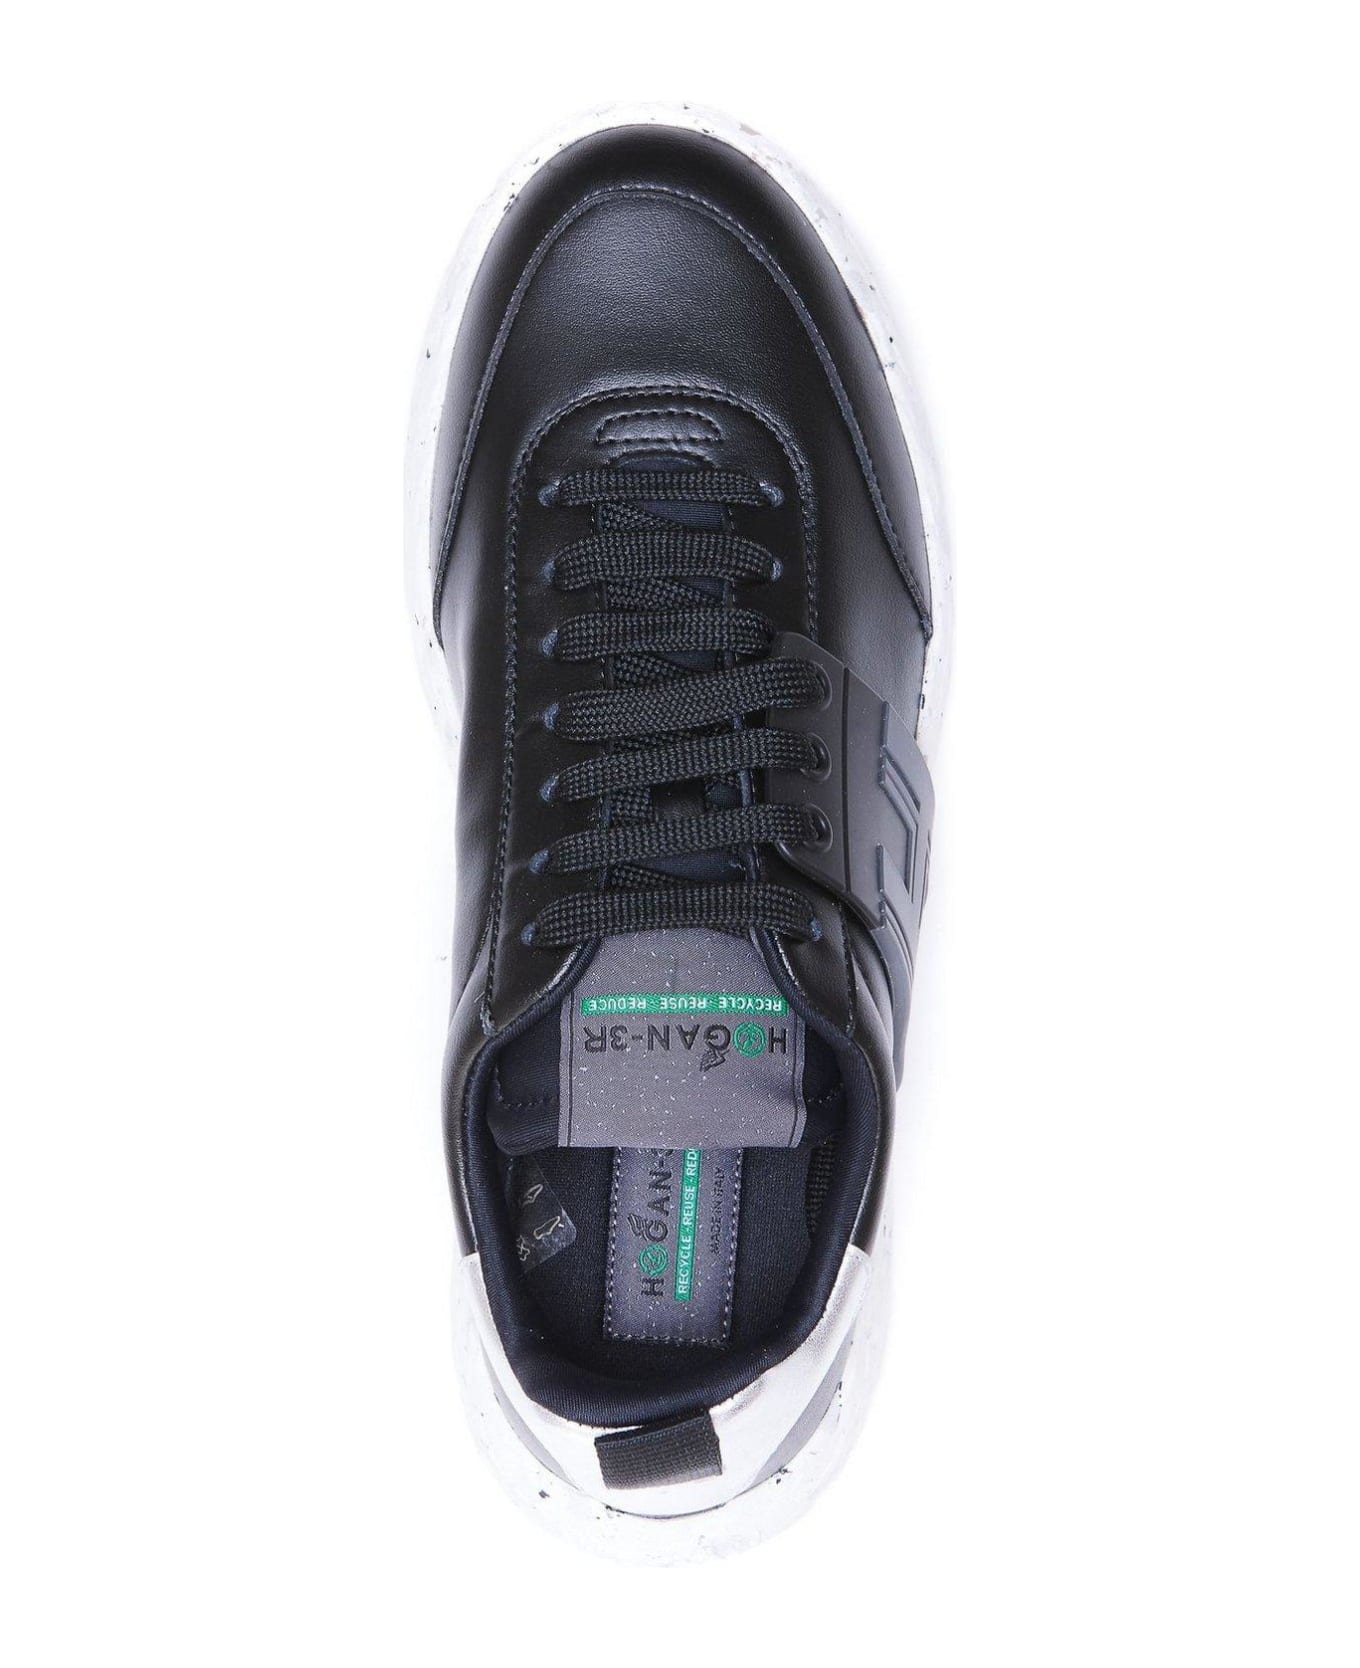 Hogan 3r Lace-up Sneakers スニーカー